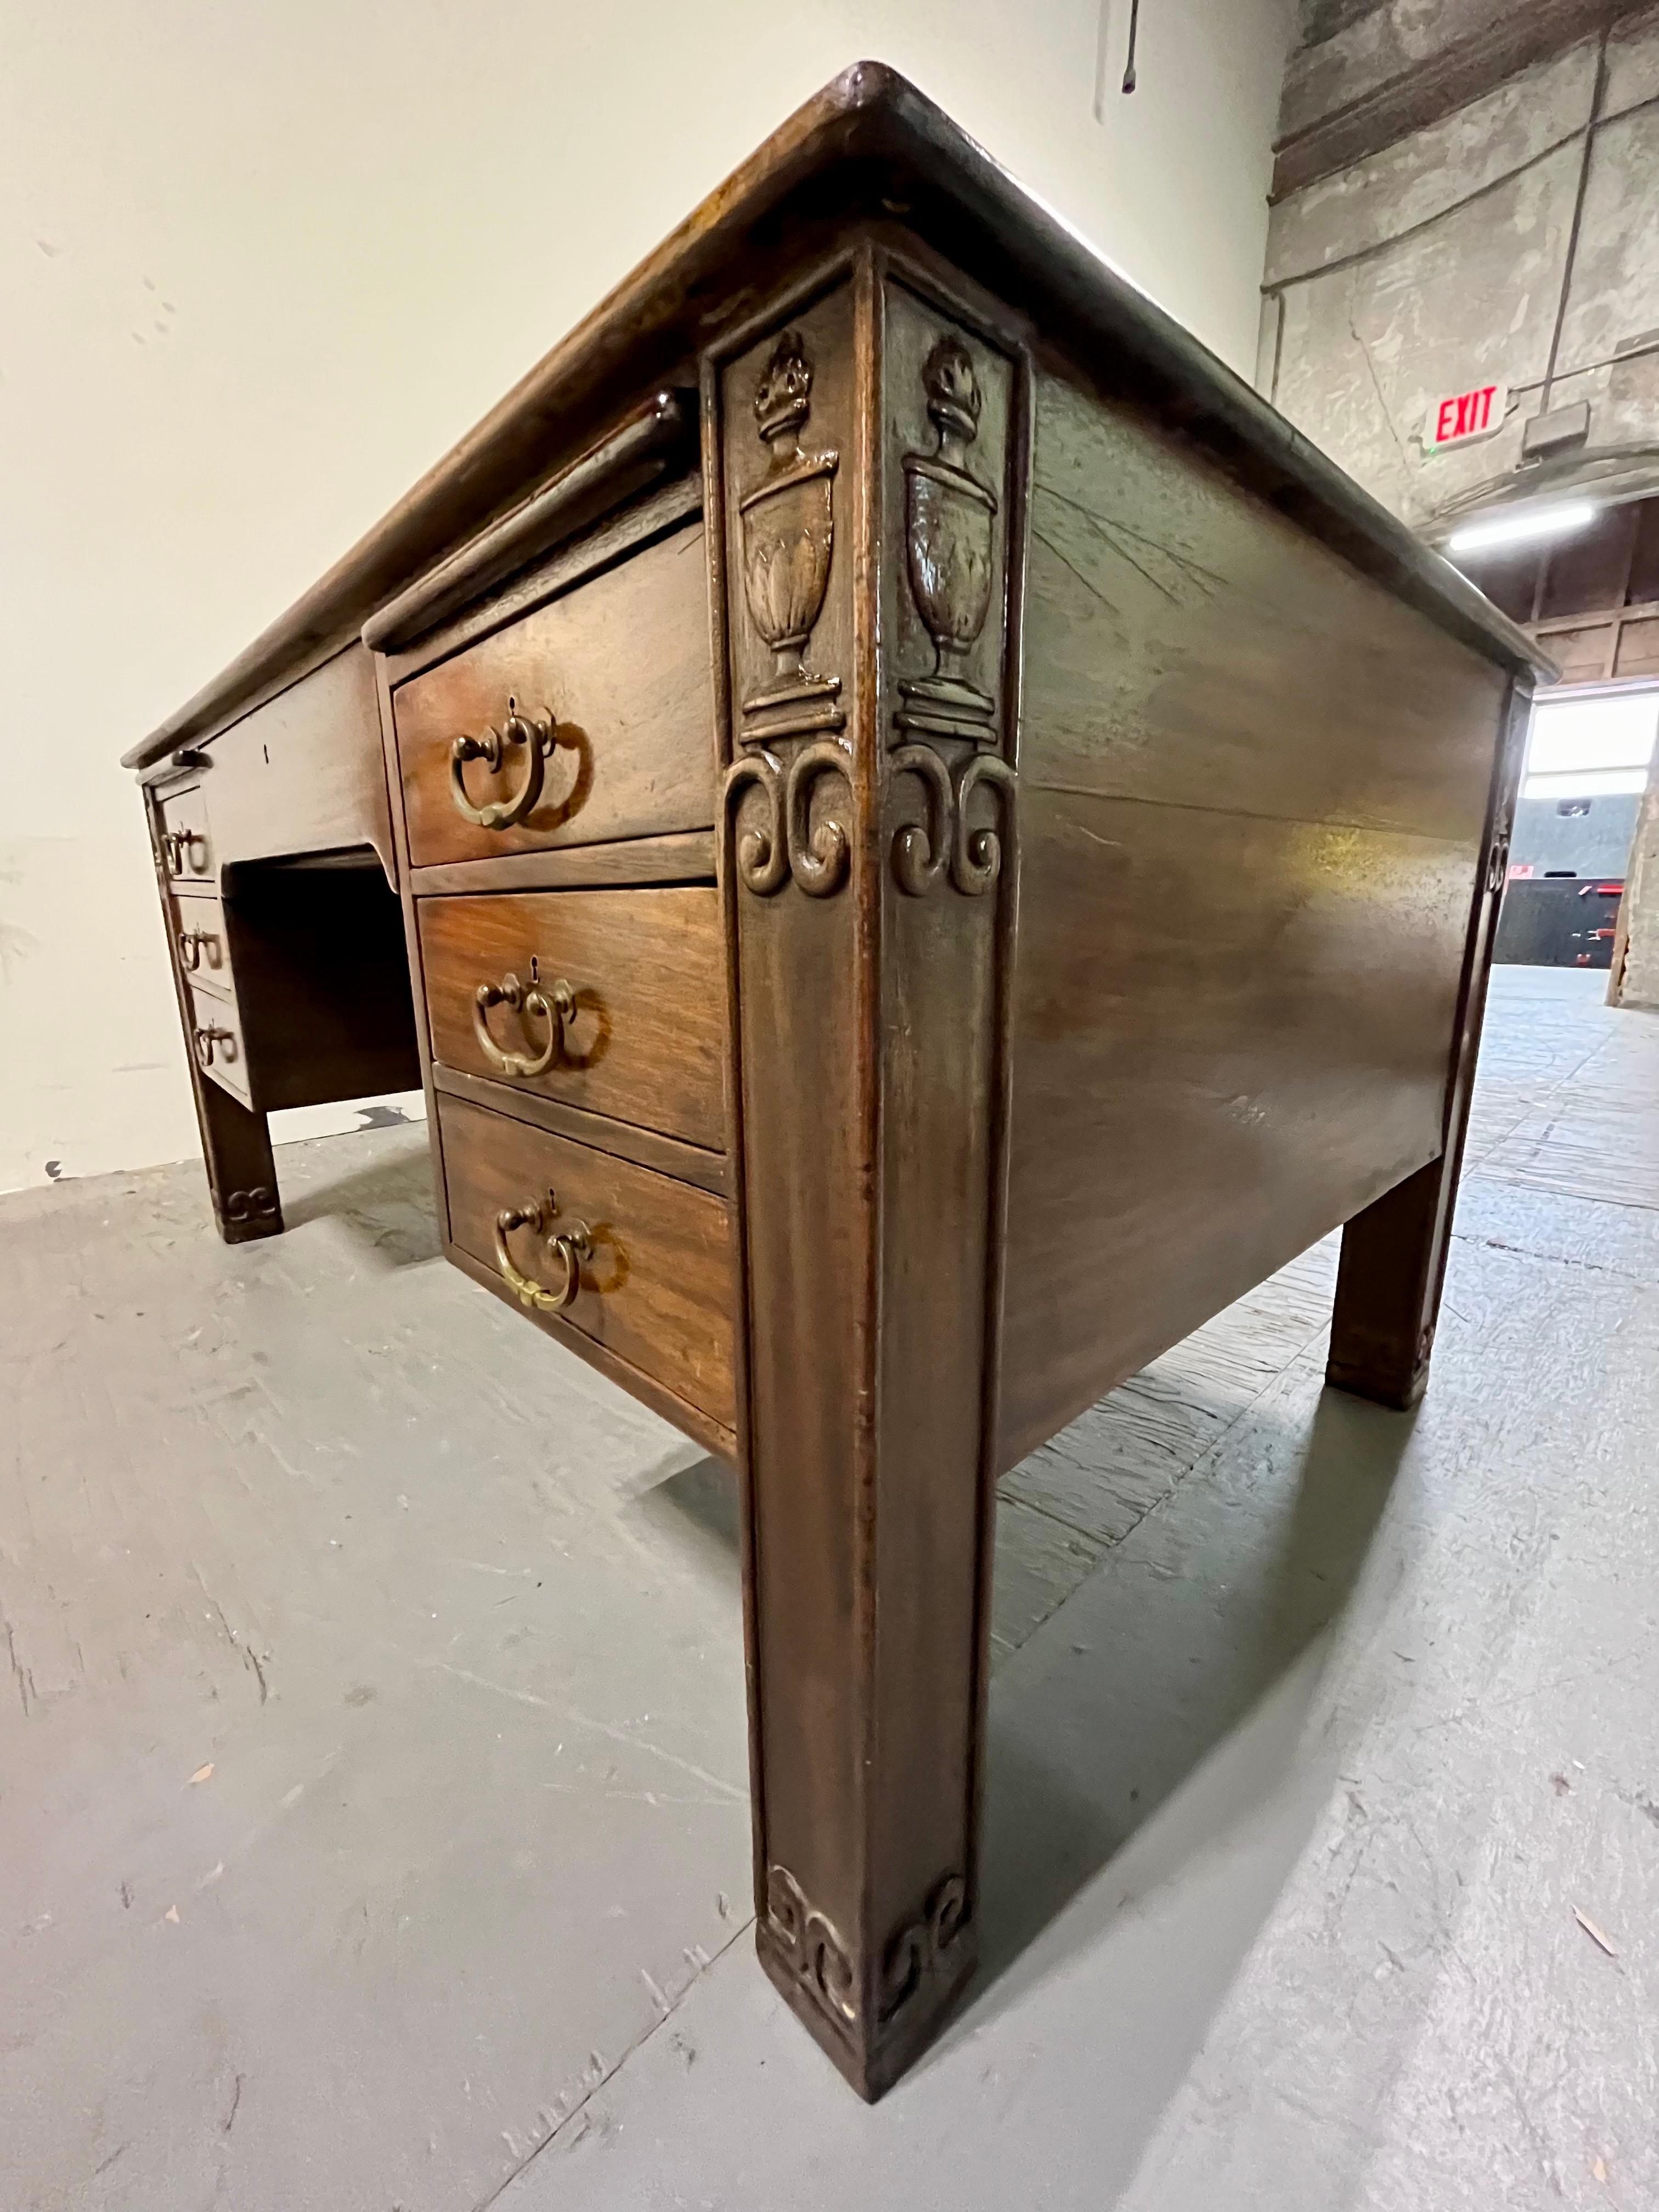 Impressive English Arts and Crafts partners desk with 14 drawers and 4 pull out writing surfaces. Classic detail with urn and scroll accent. Substantial presence.
Curbside to NYC/Philly $400